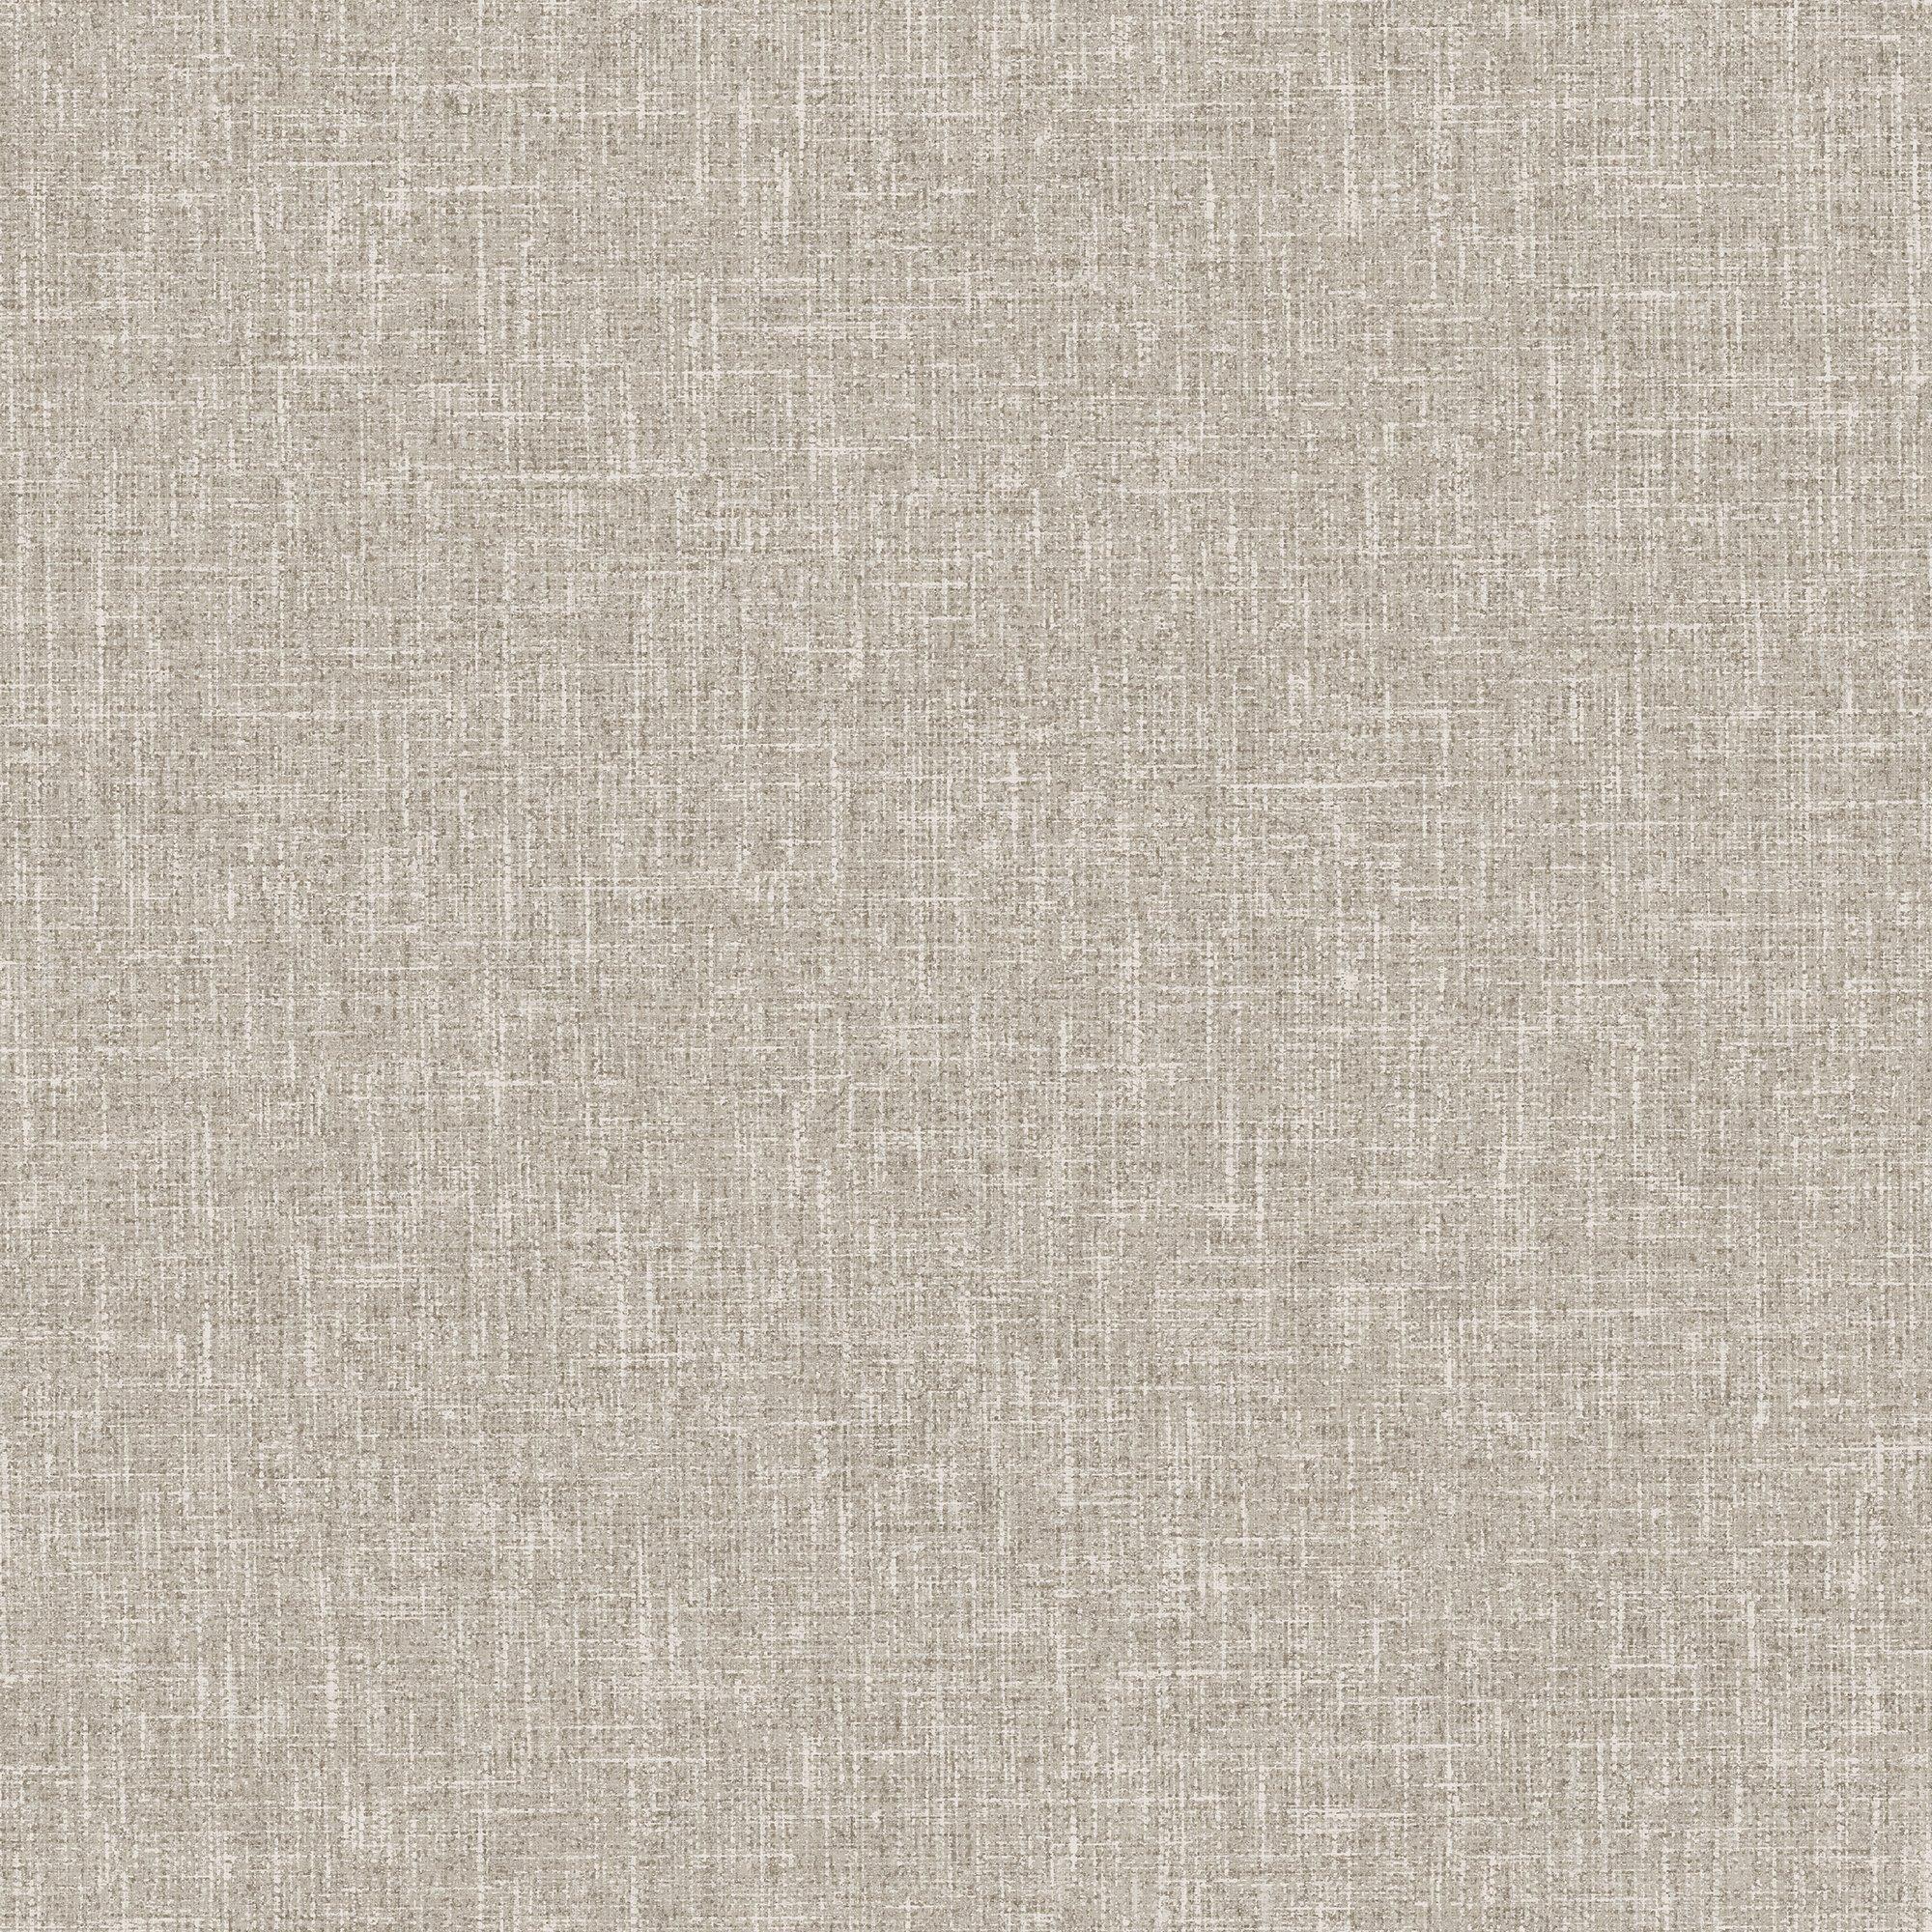 Arthouse Country Plain Textured Taupe Wallpaper